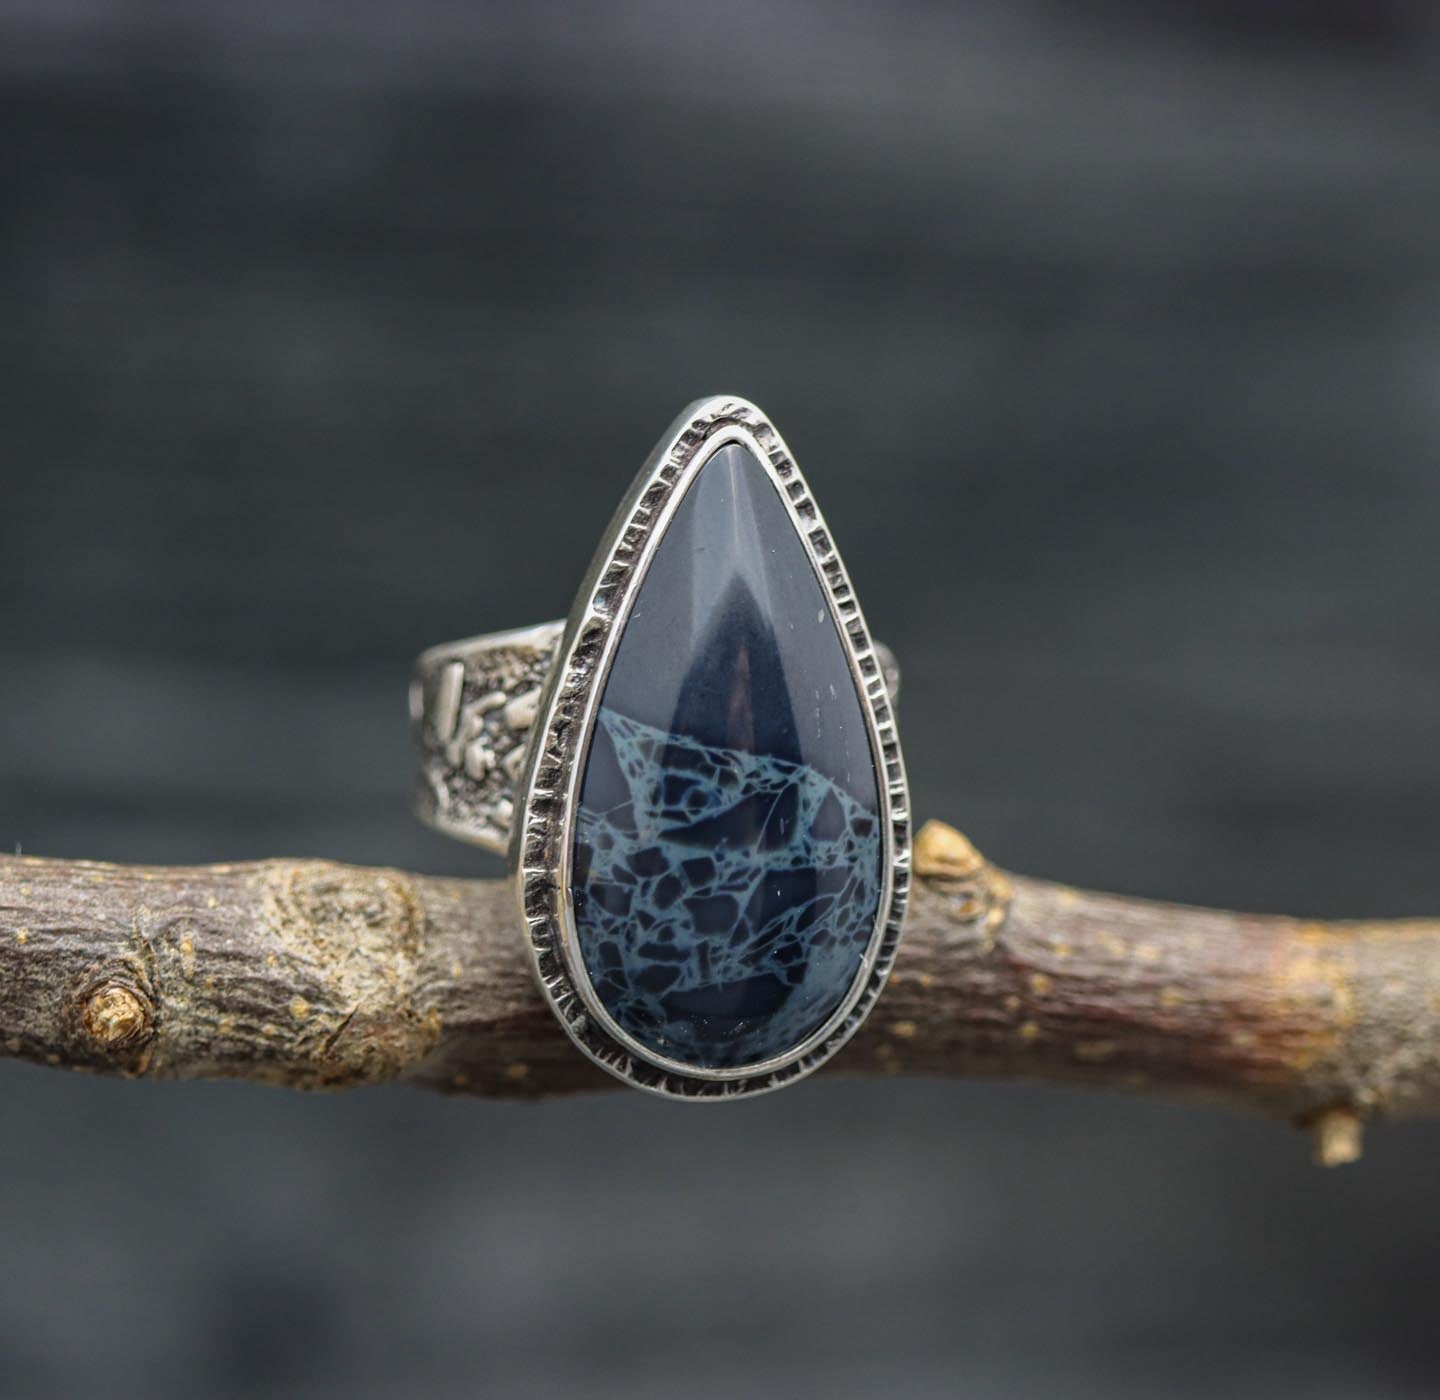 Spiderweb Obsidian Sterling Silver Wide Band Ring